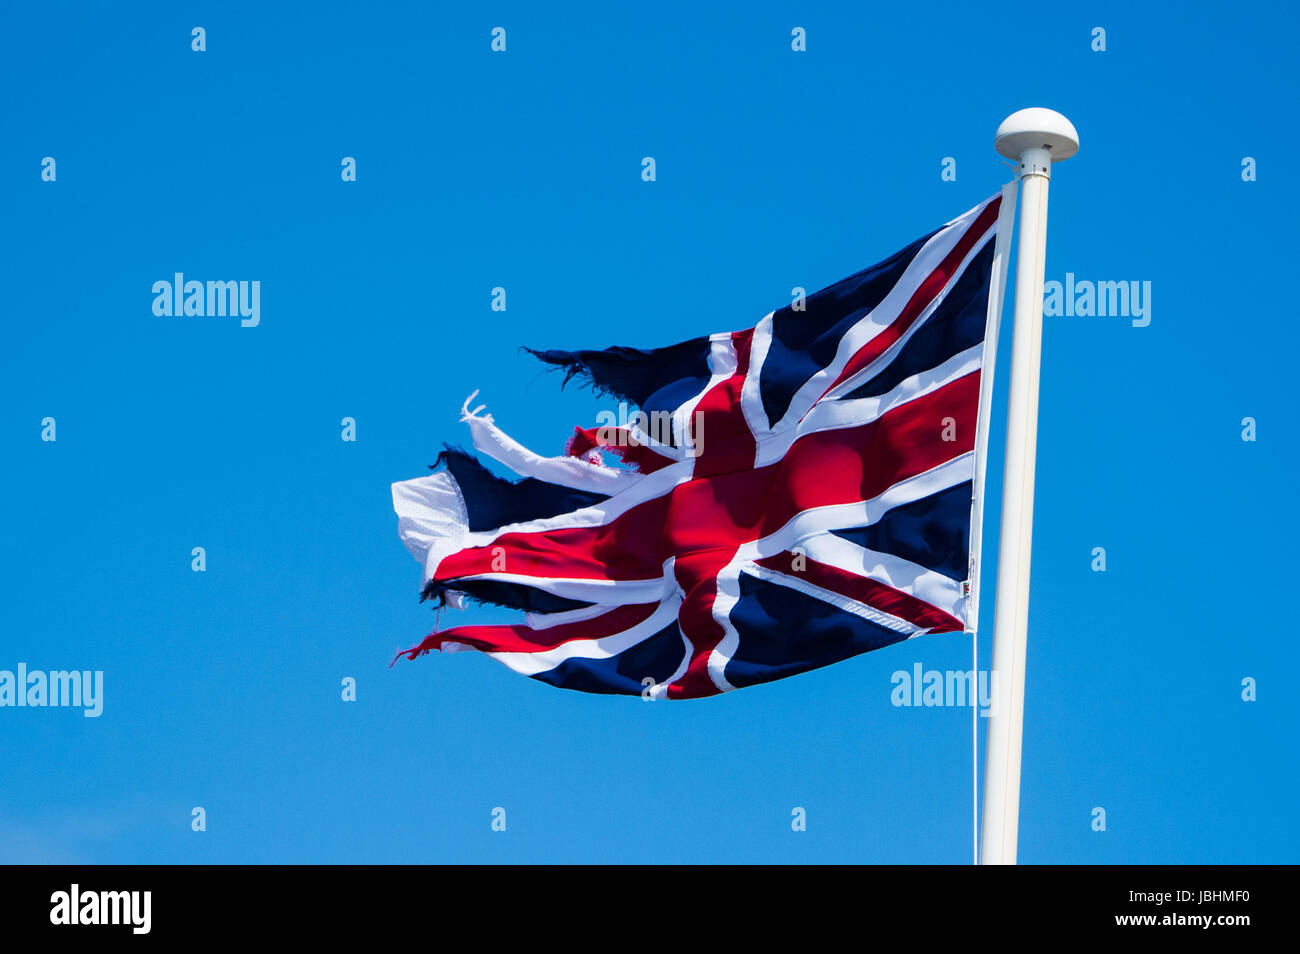 Aberystwyth Wales UK, Sunday 11 June 2017  UK Weather: The Union Jack  flag in tatters, blowing in the wind on a blustery summer sunday afternoon in Aberystwyth  on the Cardigan Bay coast of west  Wales  Photo credit: Keith Morris / ALAMY Live News Stock Photo